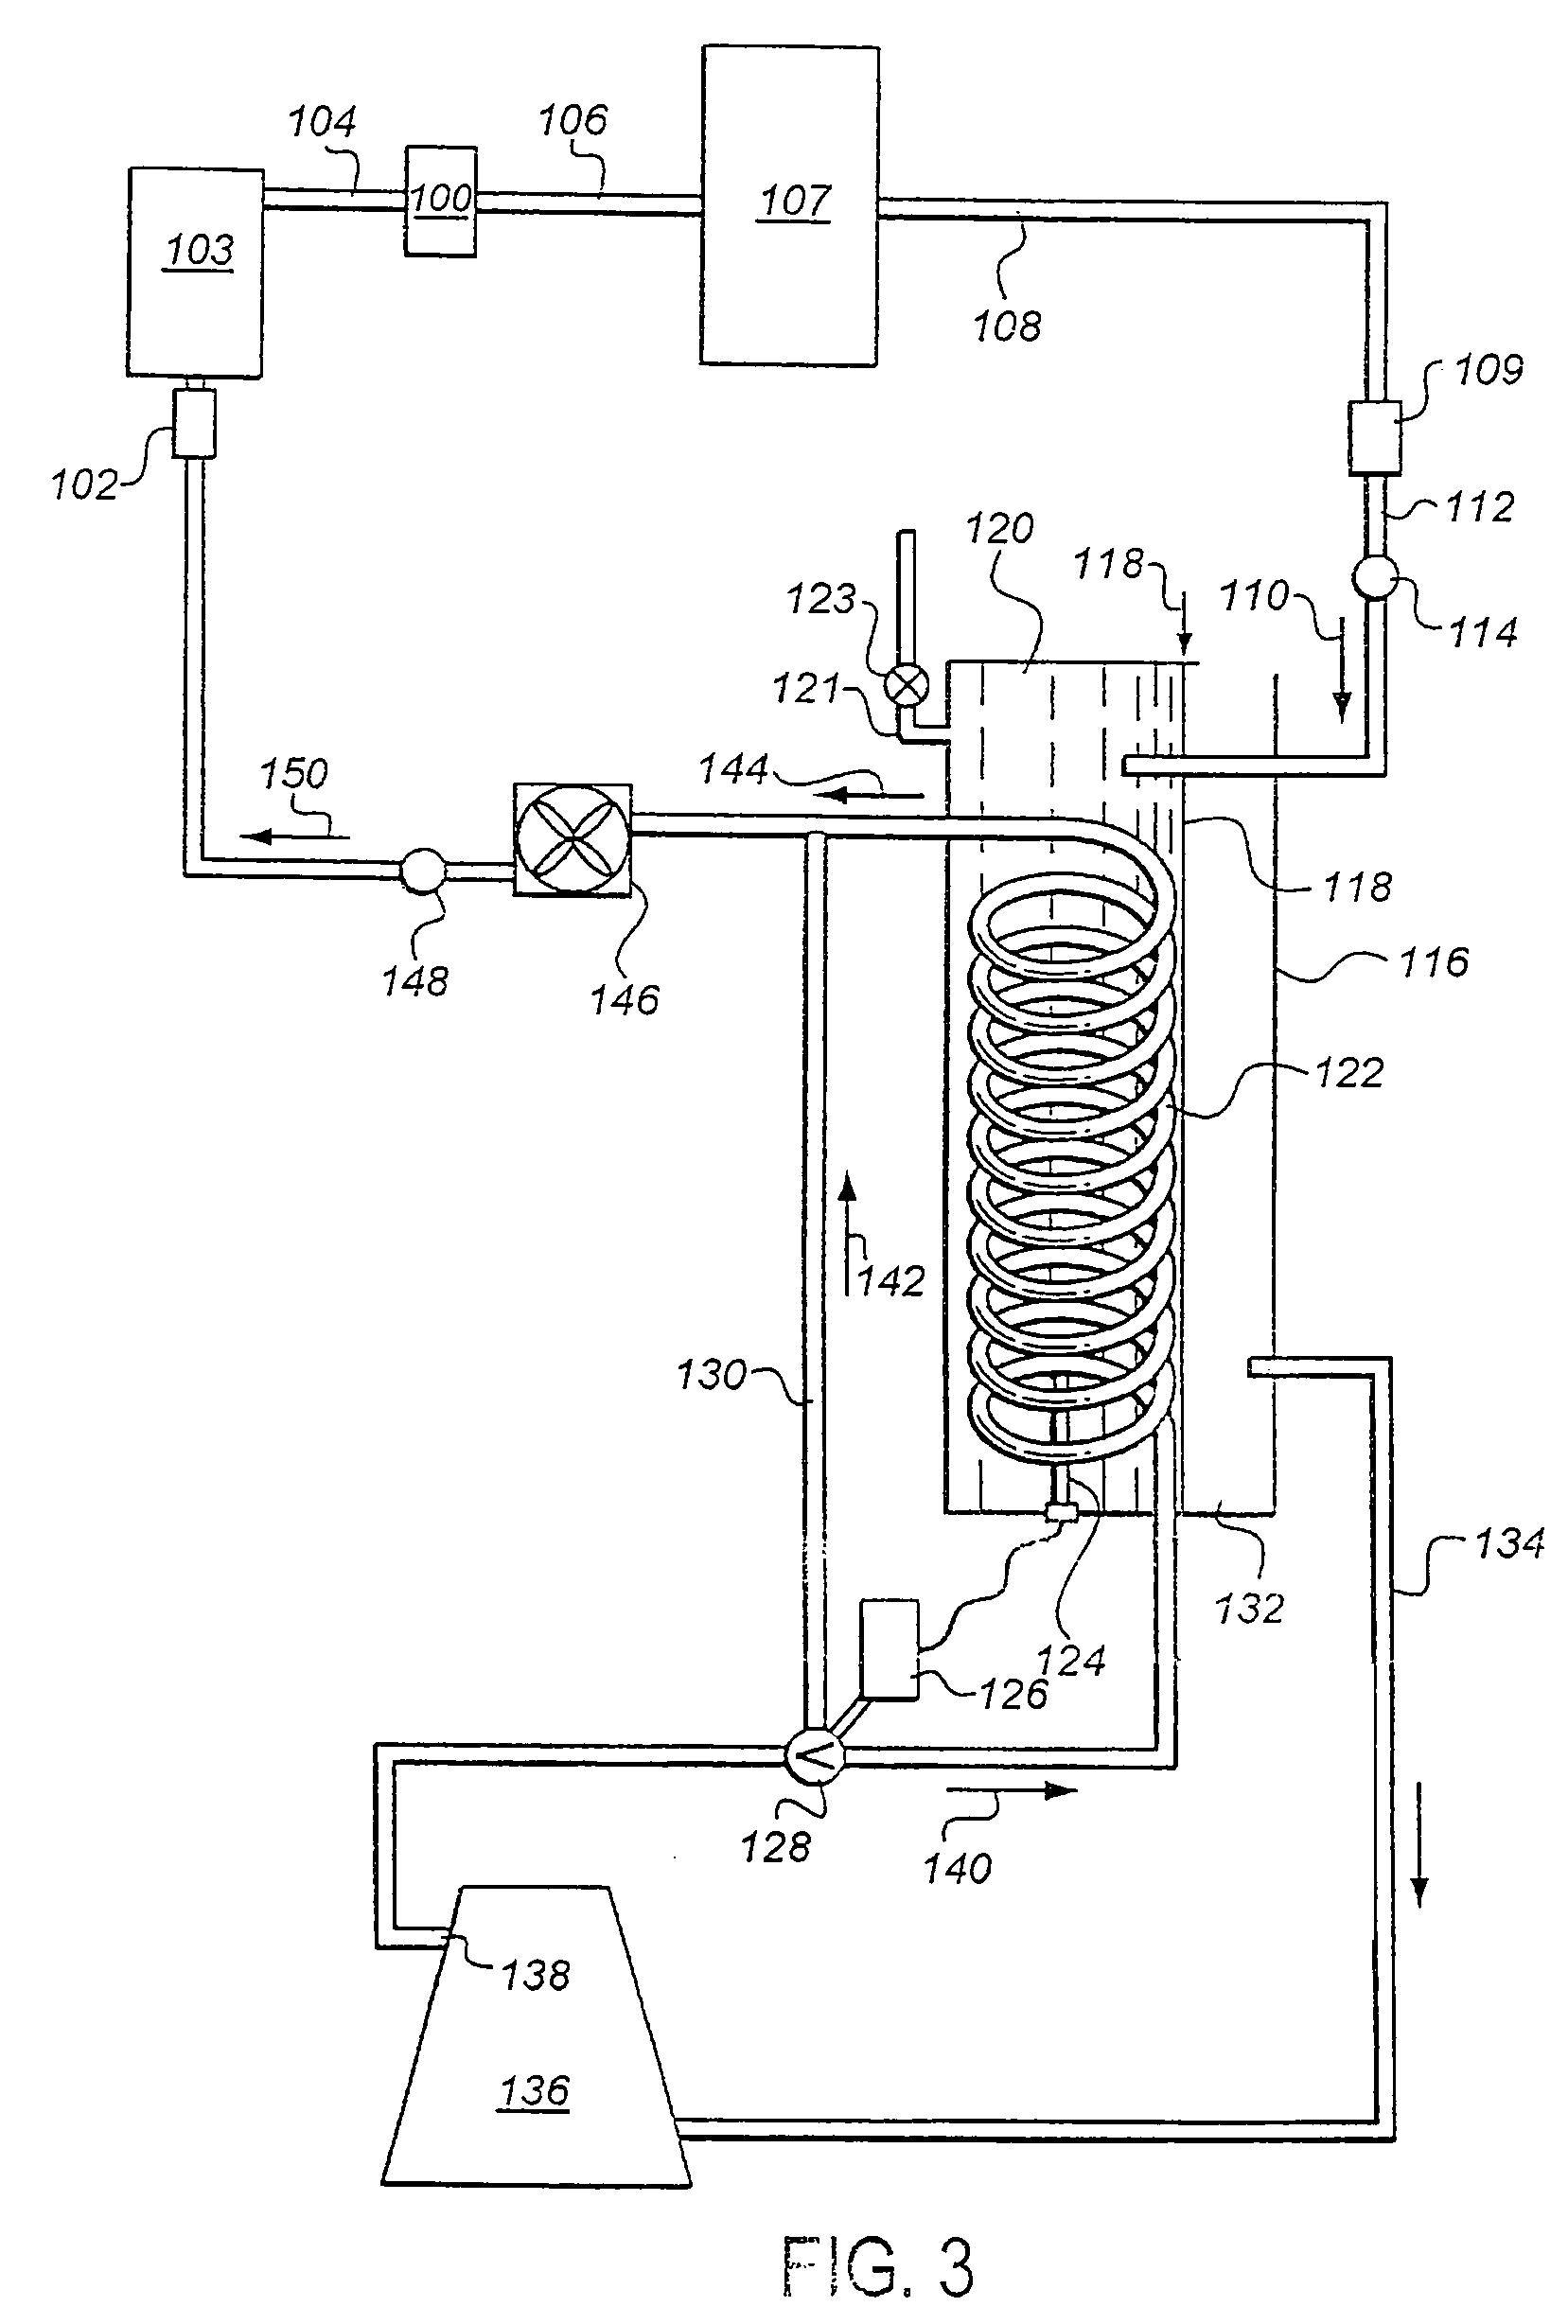 Method and apparatus for measuring and improving efficiency in refrigeration systems